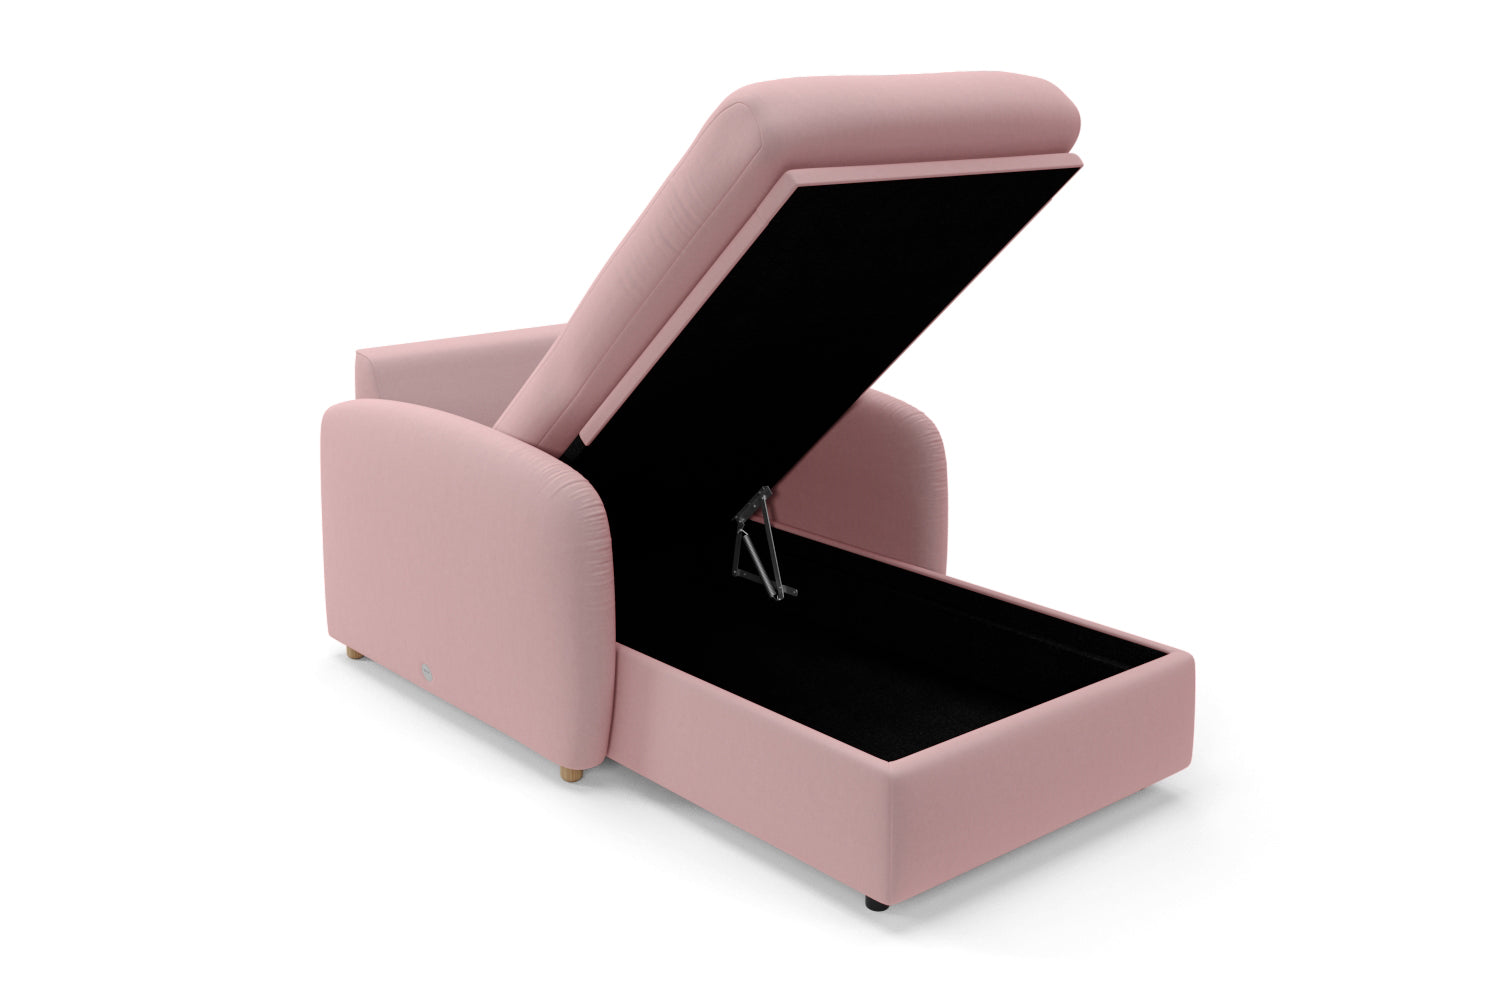 SNUG | The Small Biggie Chaise Longue in Blush variant_40575168413744